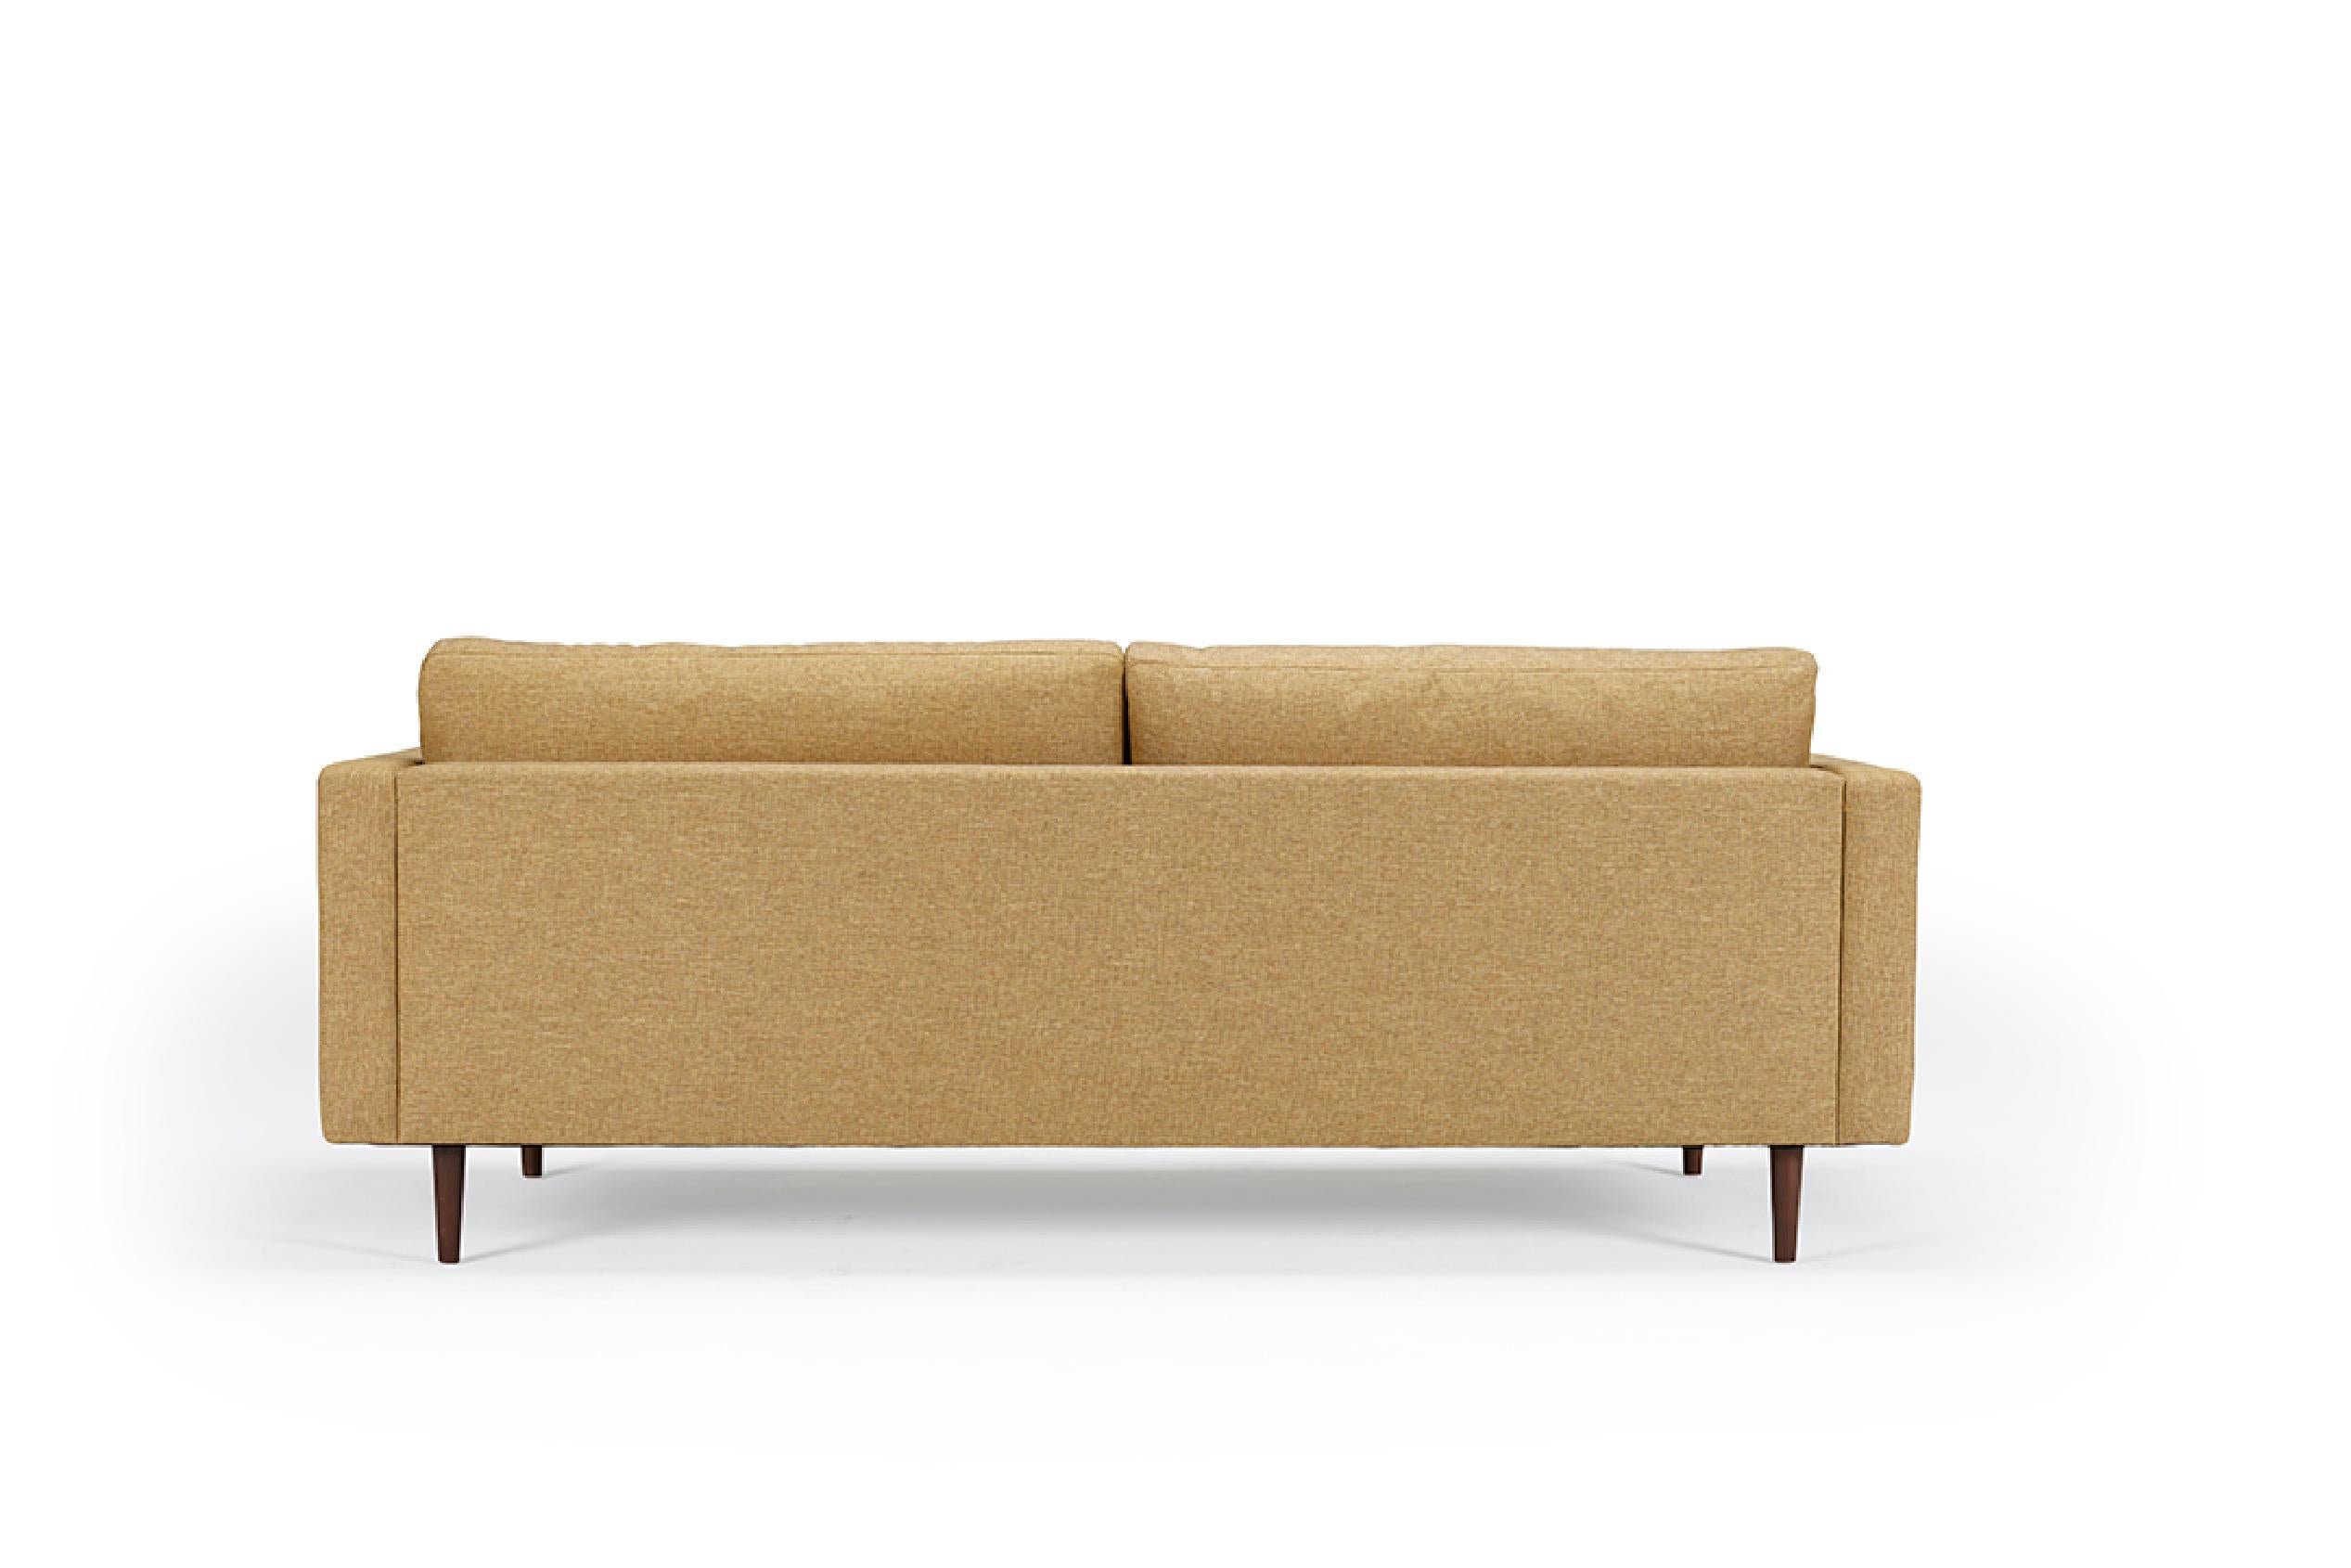 European  Hayche Clasico 3 Seater Sofa - Yellow, UK, Made to Order For Sale